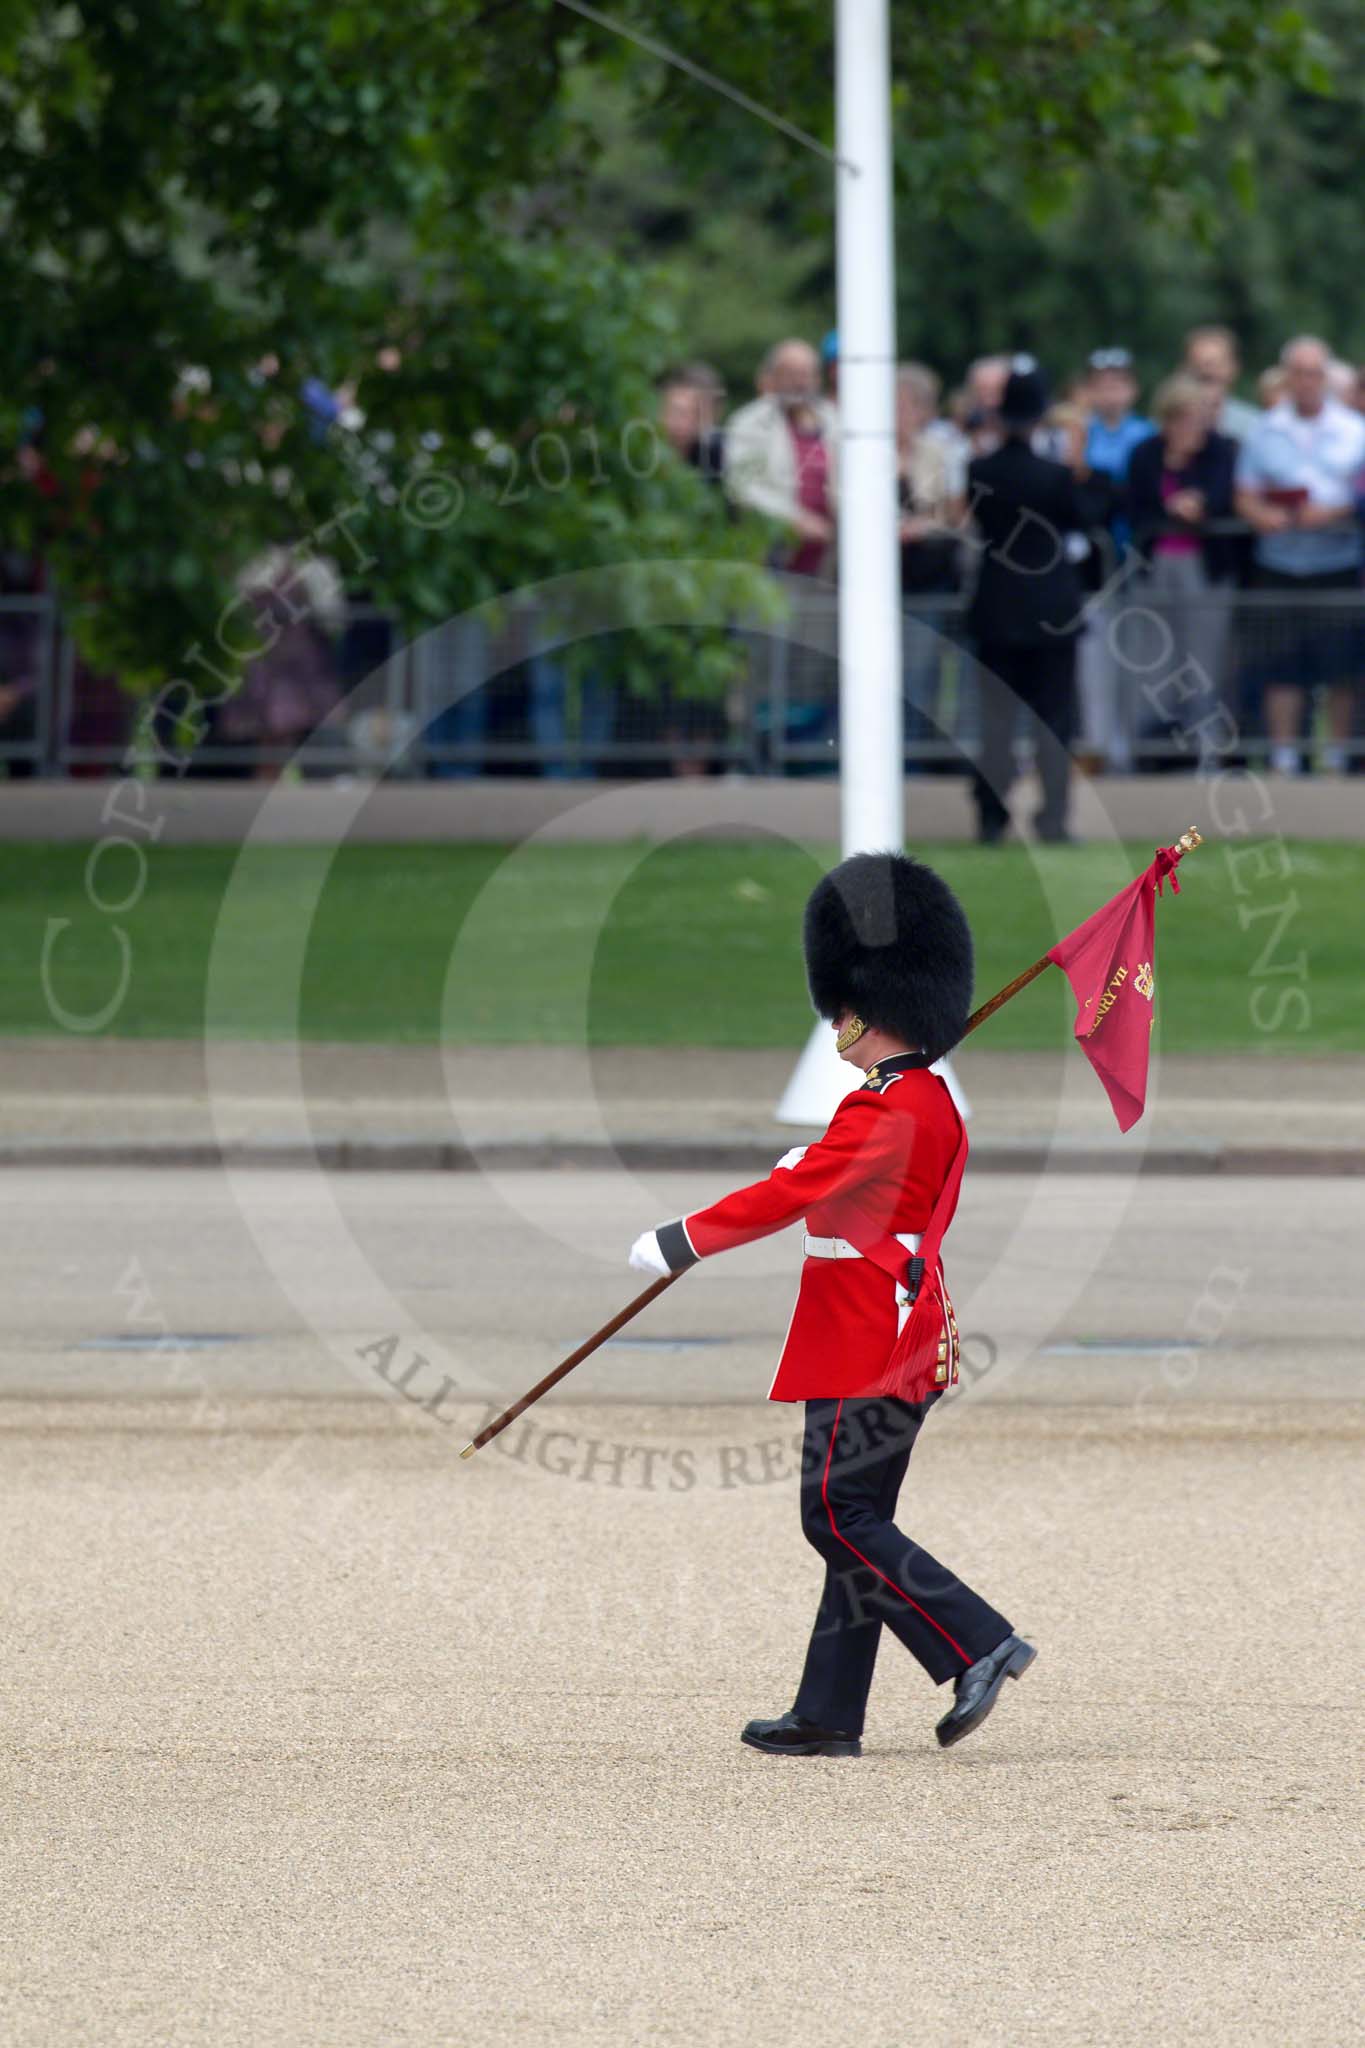 Trooping the Colour 2010: 'March On' - the run-up to the parade. A guardsman of the Grenadier Guards' ('marker') bearing a 'marker flag' that will be used to mark the position of his company on the parade ground..
Horse Guards Parade, Westminster,
London SW1,
Greater London,
United Kingdom,
on 12 June 2010 at 10:18, image #6